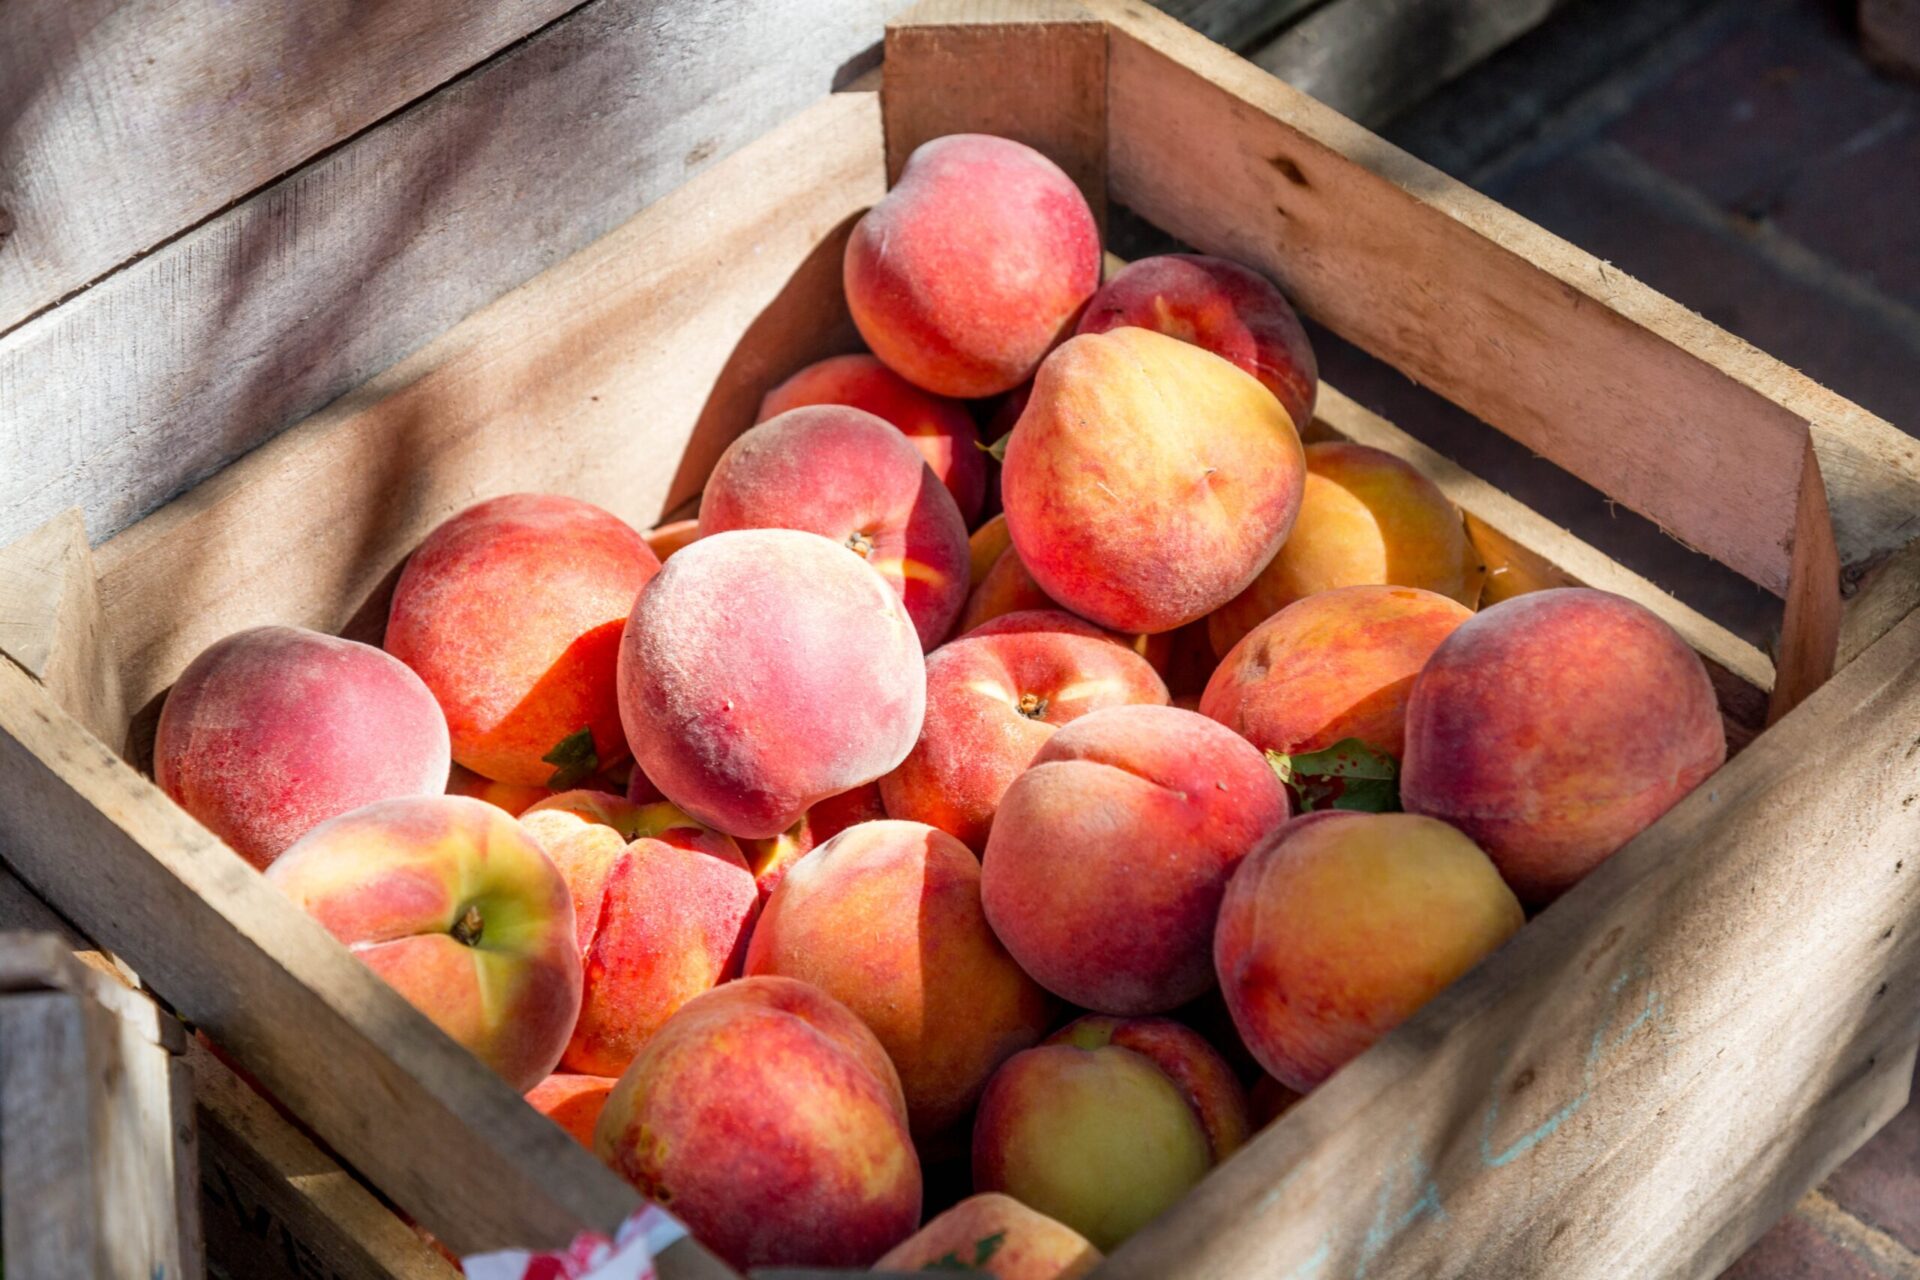 A wooden crate filled with peaches sit in dappled sunlight.